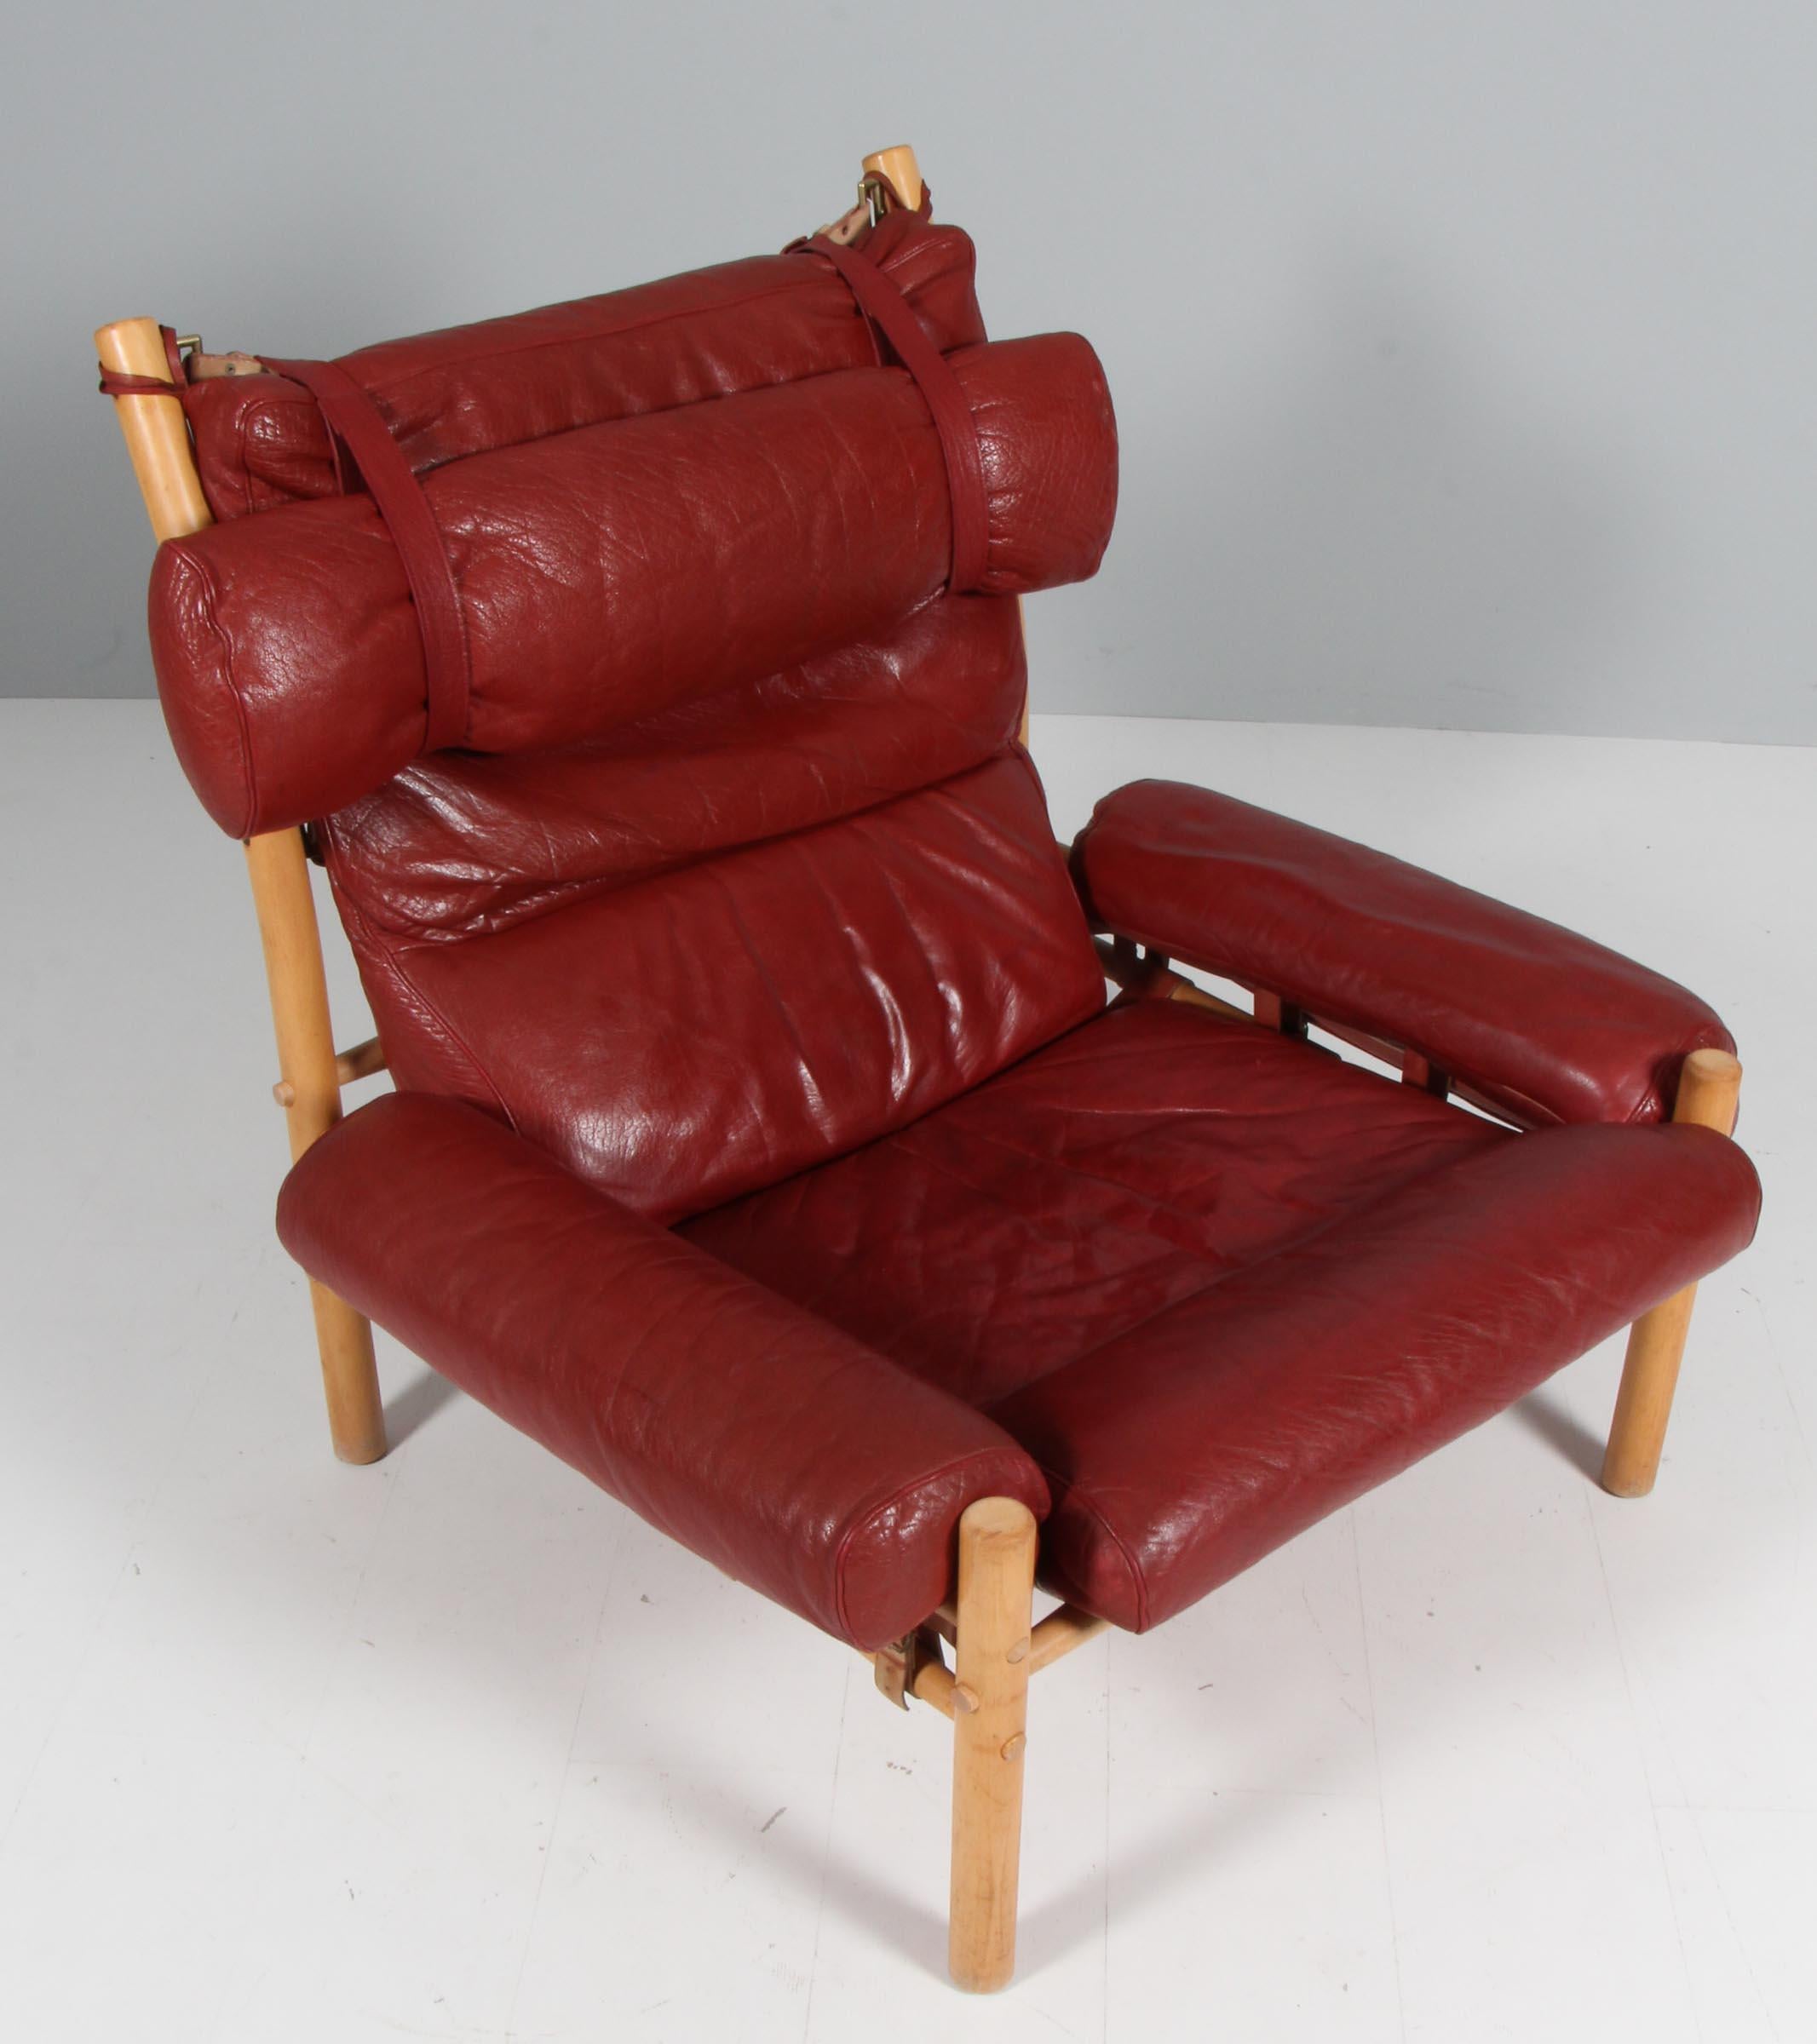 Arne Norell 'Inca' Lounge Chair with Ottoman in original leather In Good Condition For Sale In Esbjerg, DK